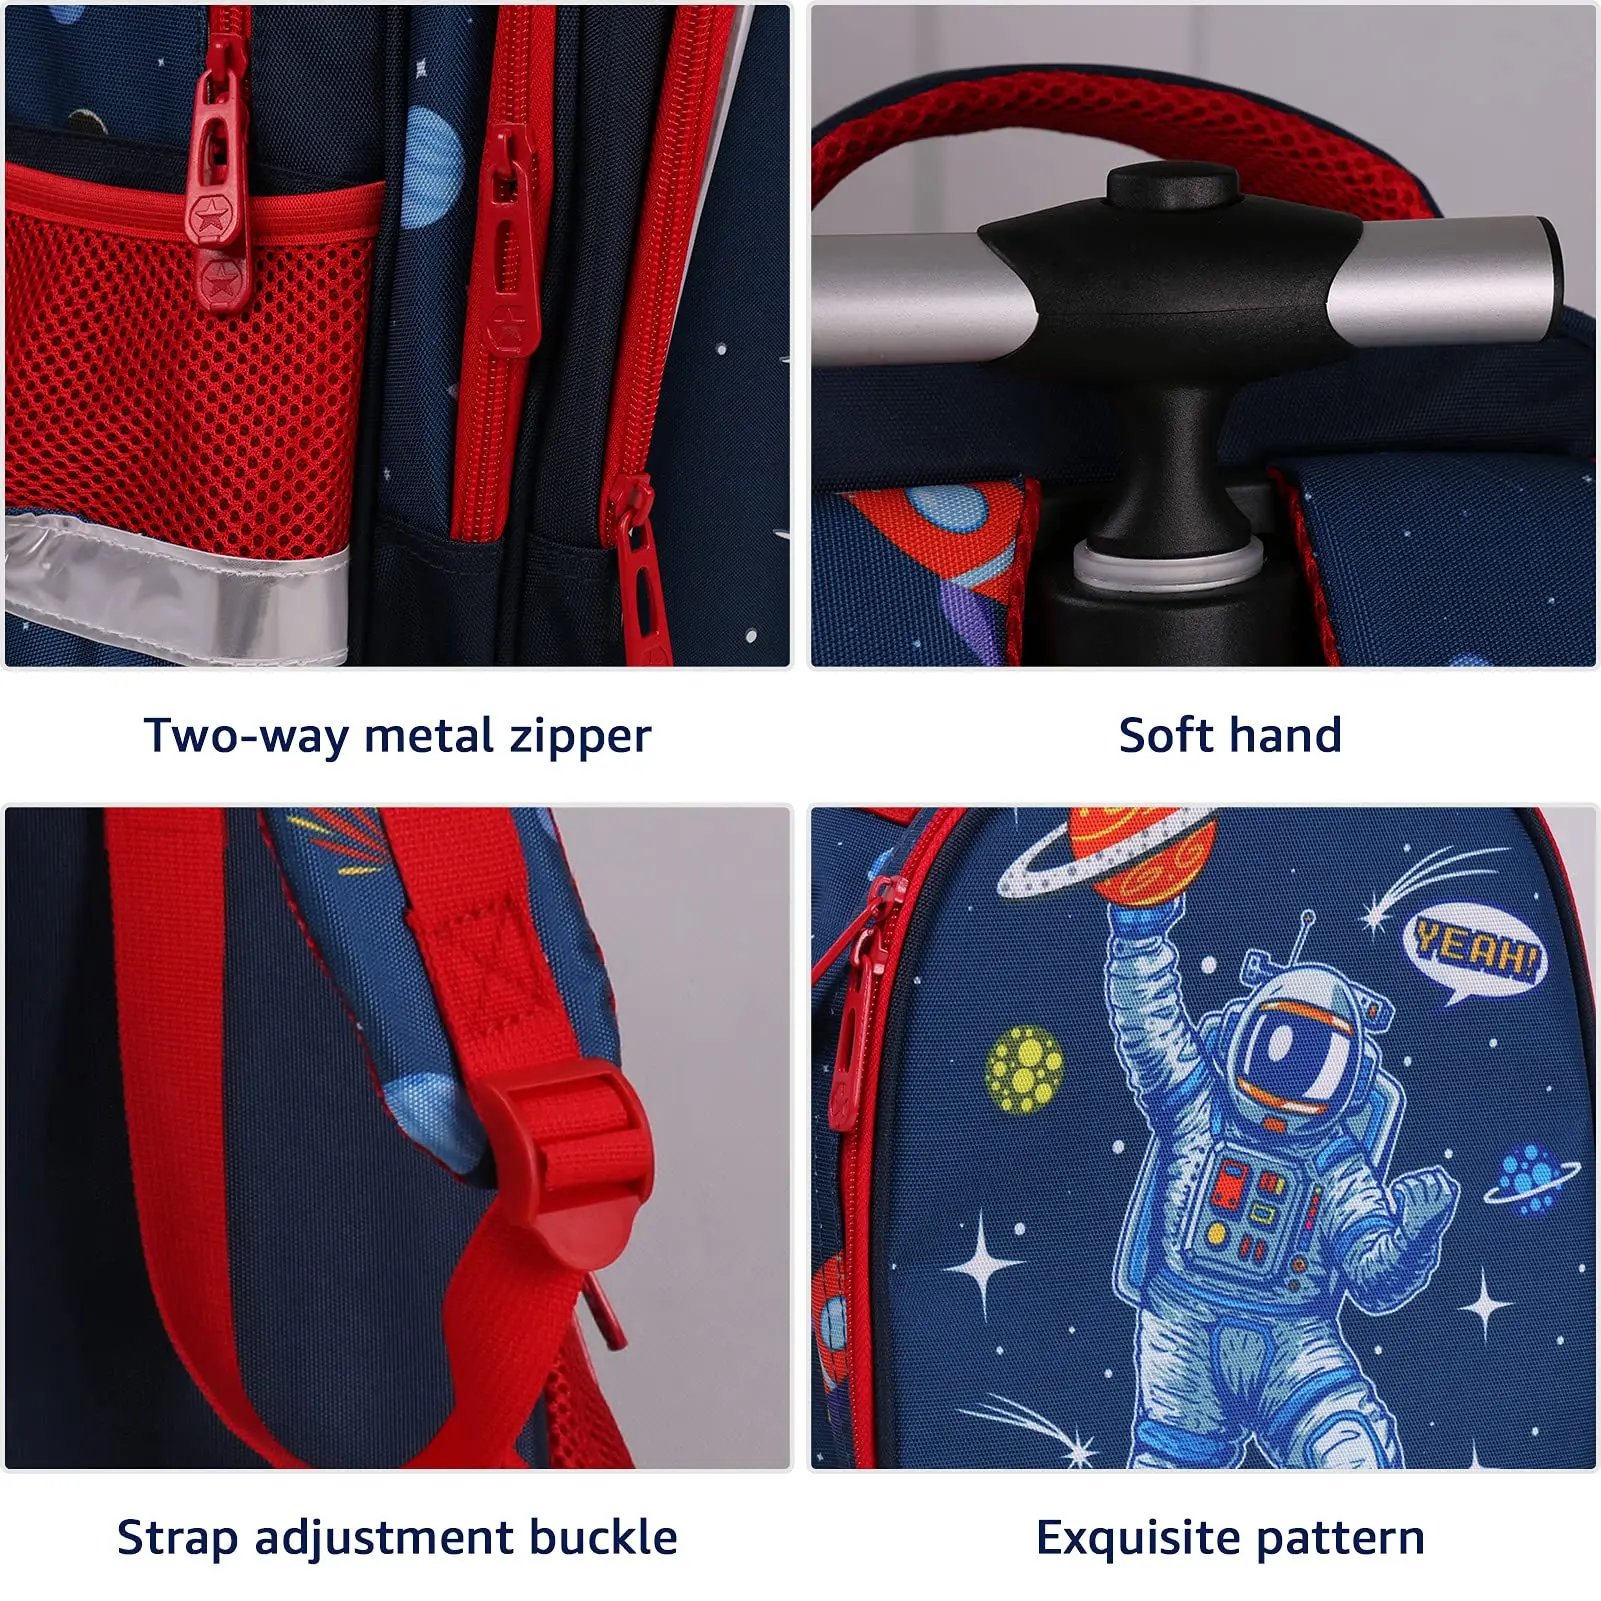 Wholesale Child luggage travel bags primary school trolley bag Boys and girls cartoon printed backpack